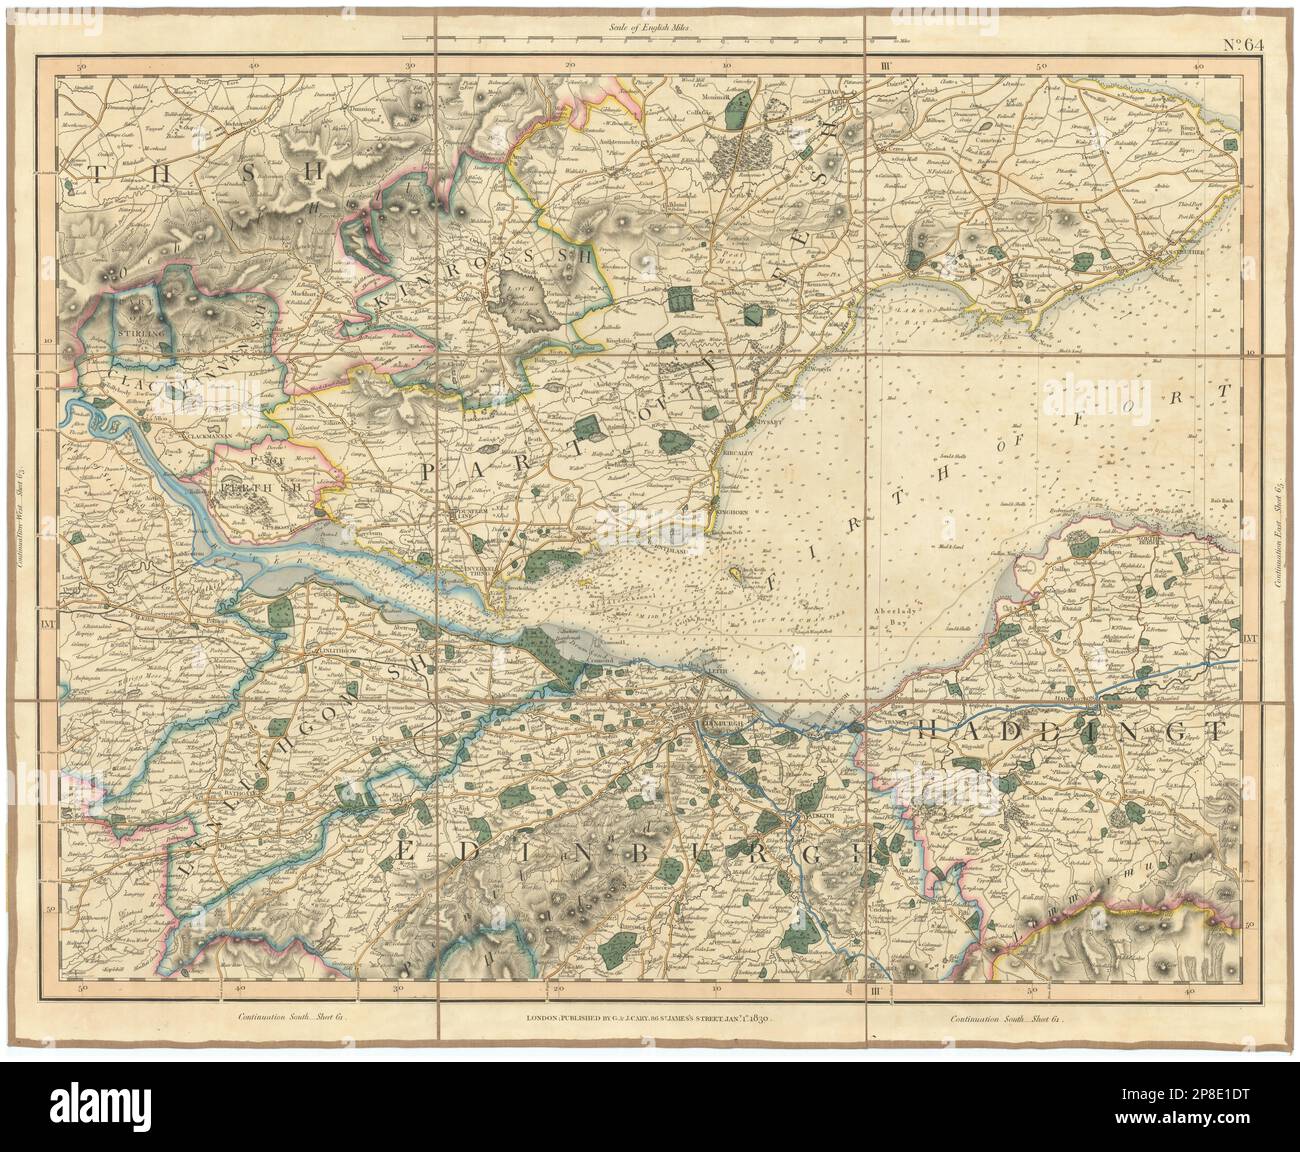 FIRTH OF FORTH. Fife & Lothian. Linlithgow Edinburgh Dunfermline. CARY 1832 map Stock Photo